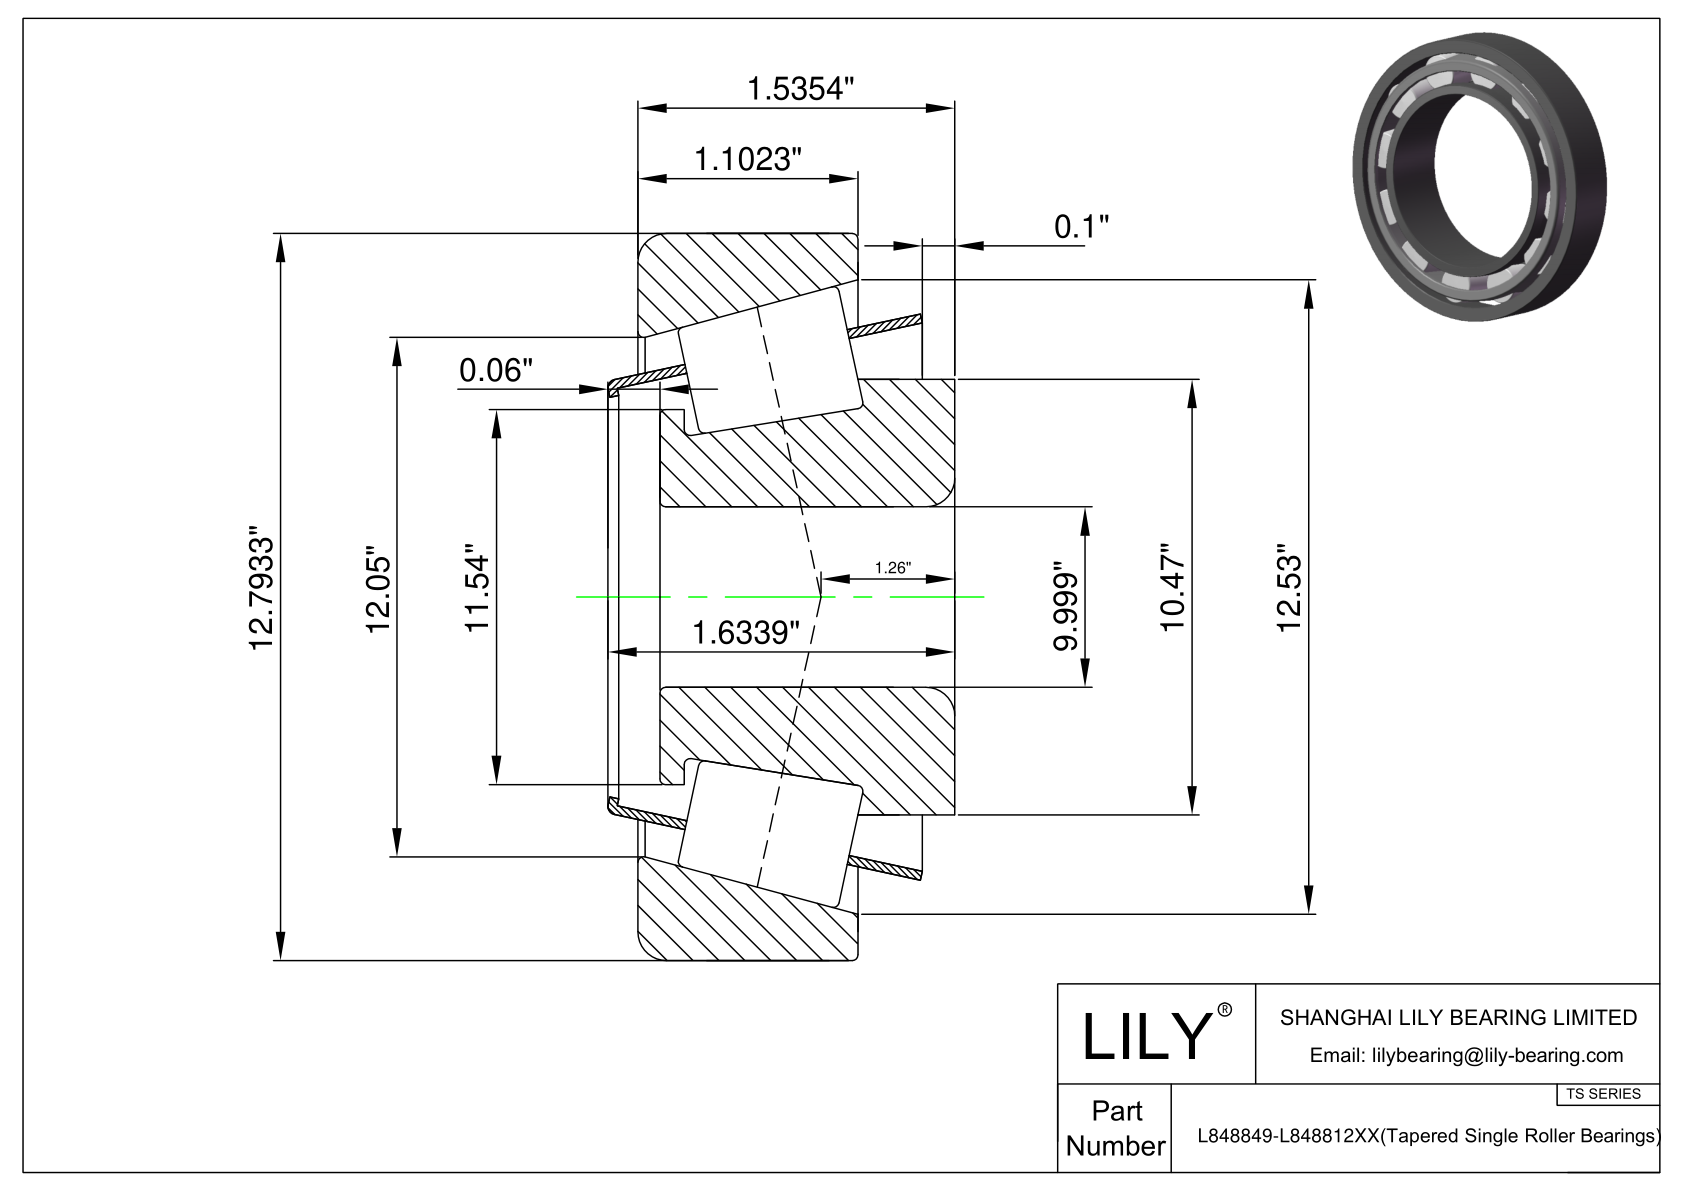 L848849-L848812XX TS (Tapered Single Roller Bearings) (Imperial) cad drawing